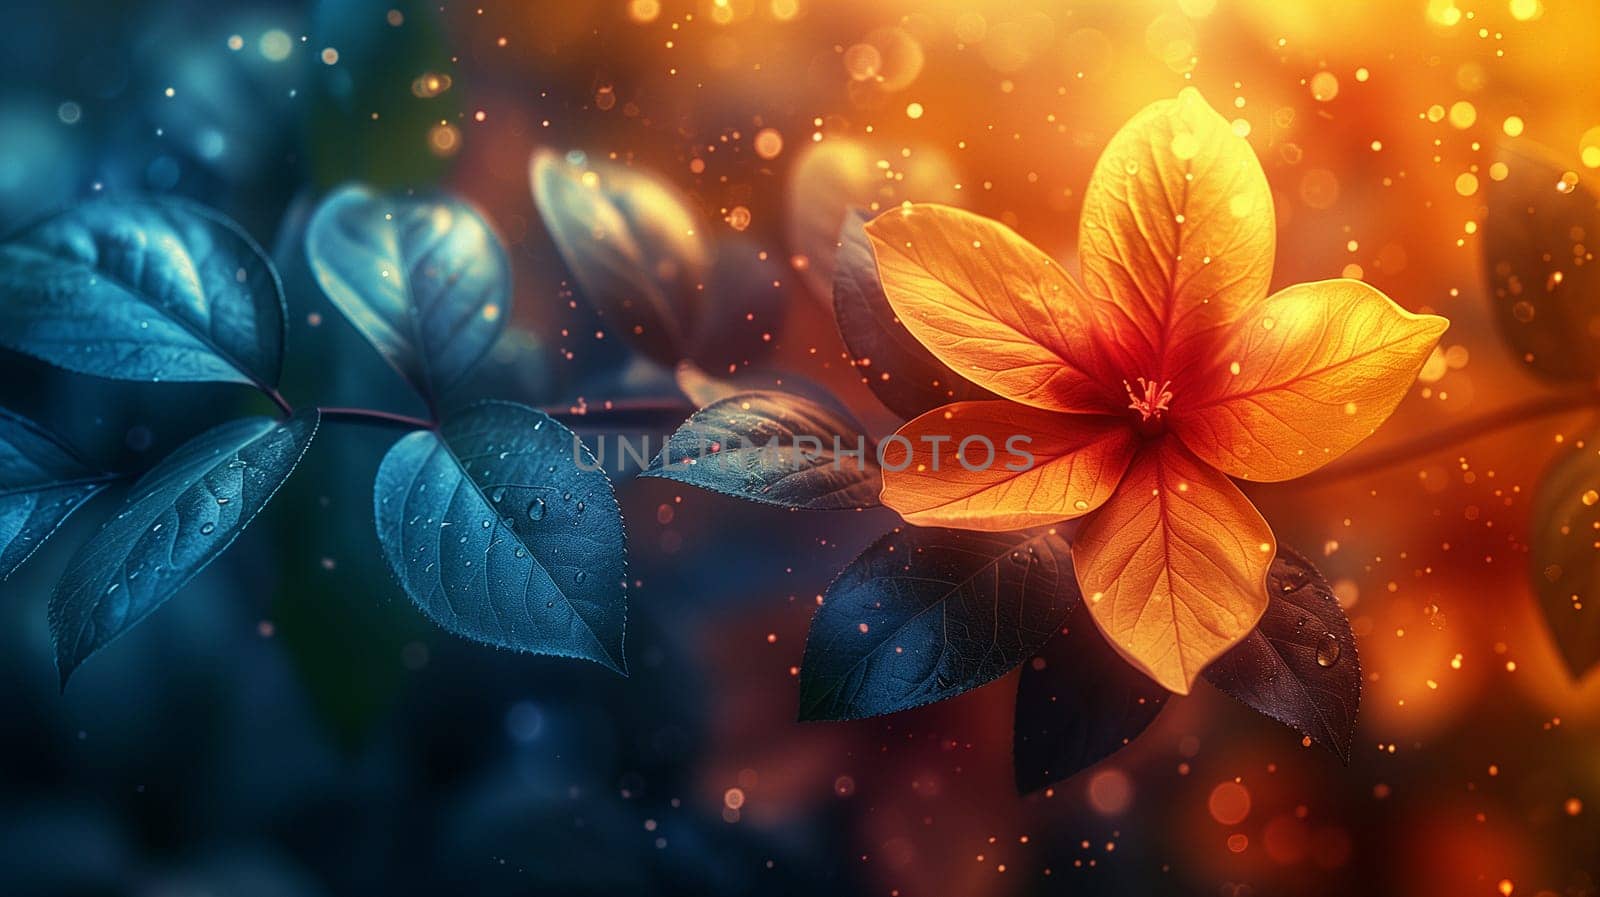 Summer and spring energy abstract background. High quality illustration